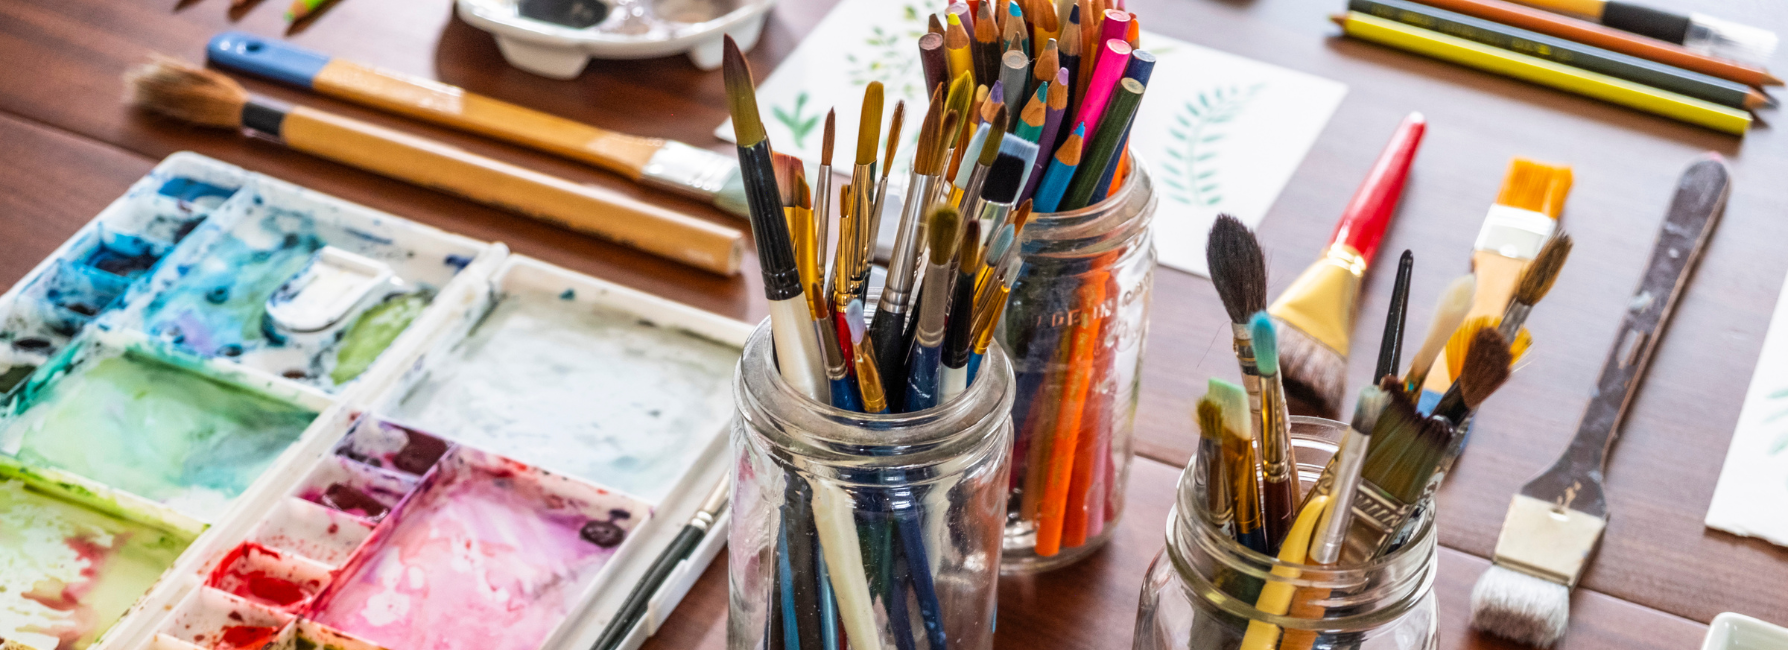 Paints, brushes in jars, and other art supplies on a table.